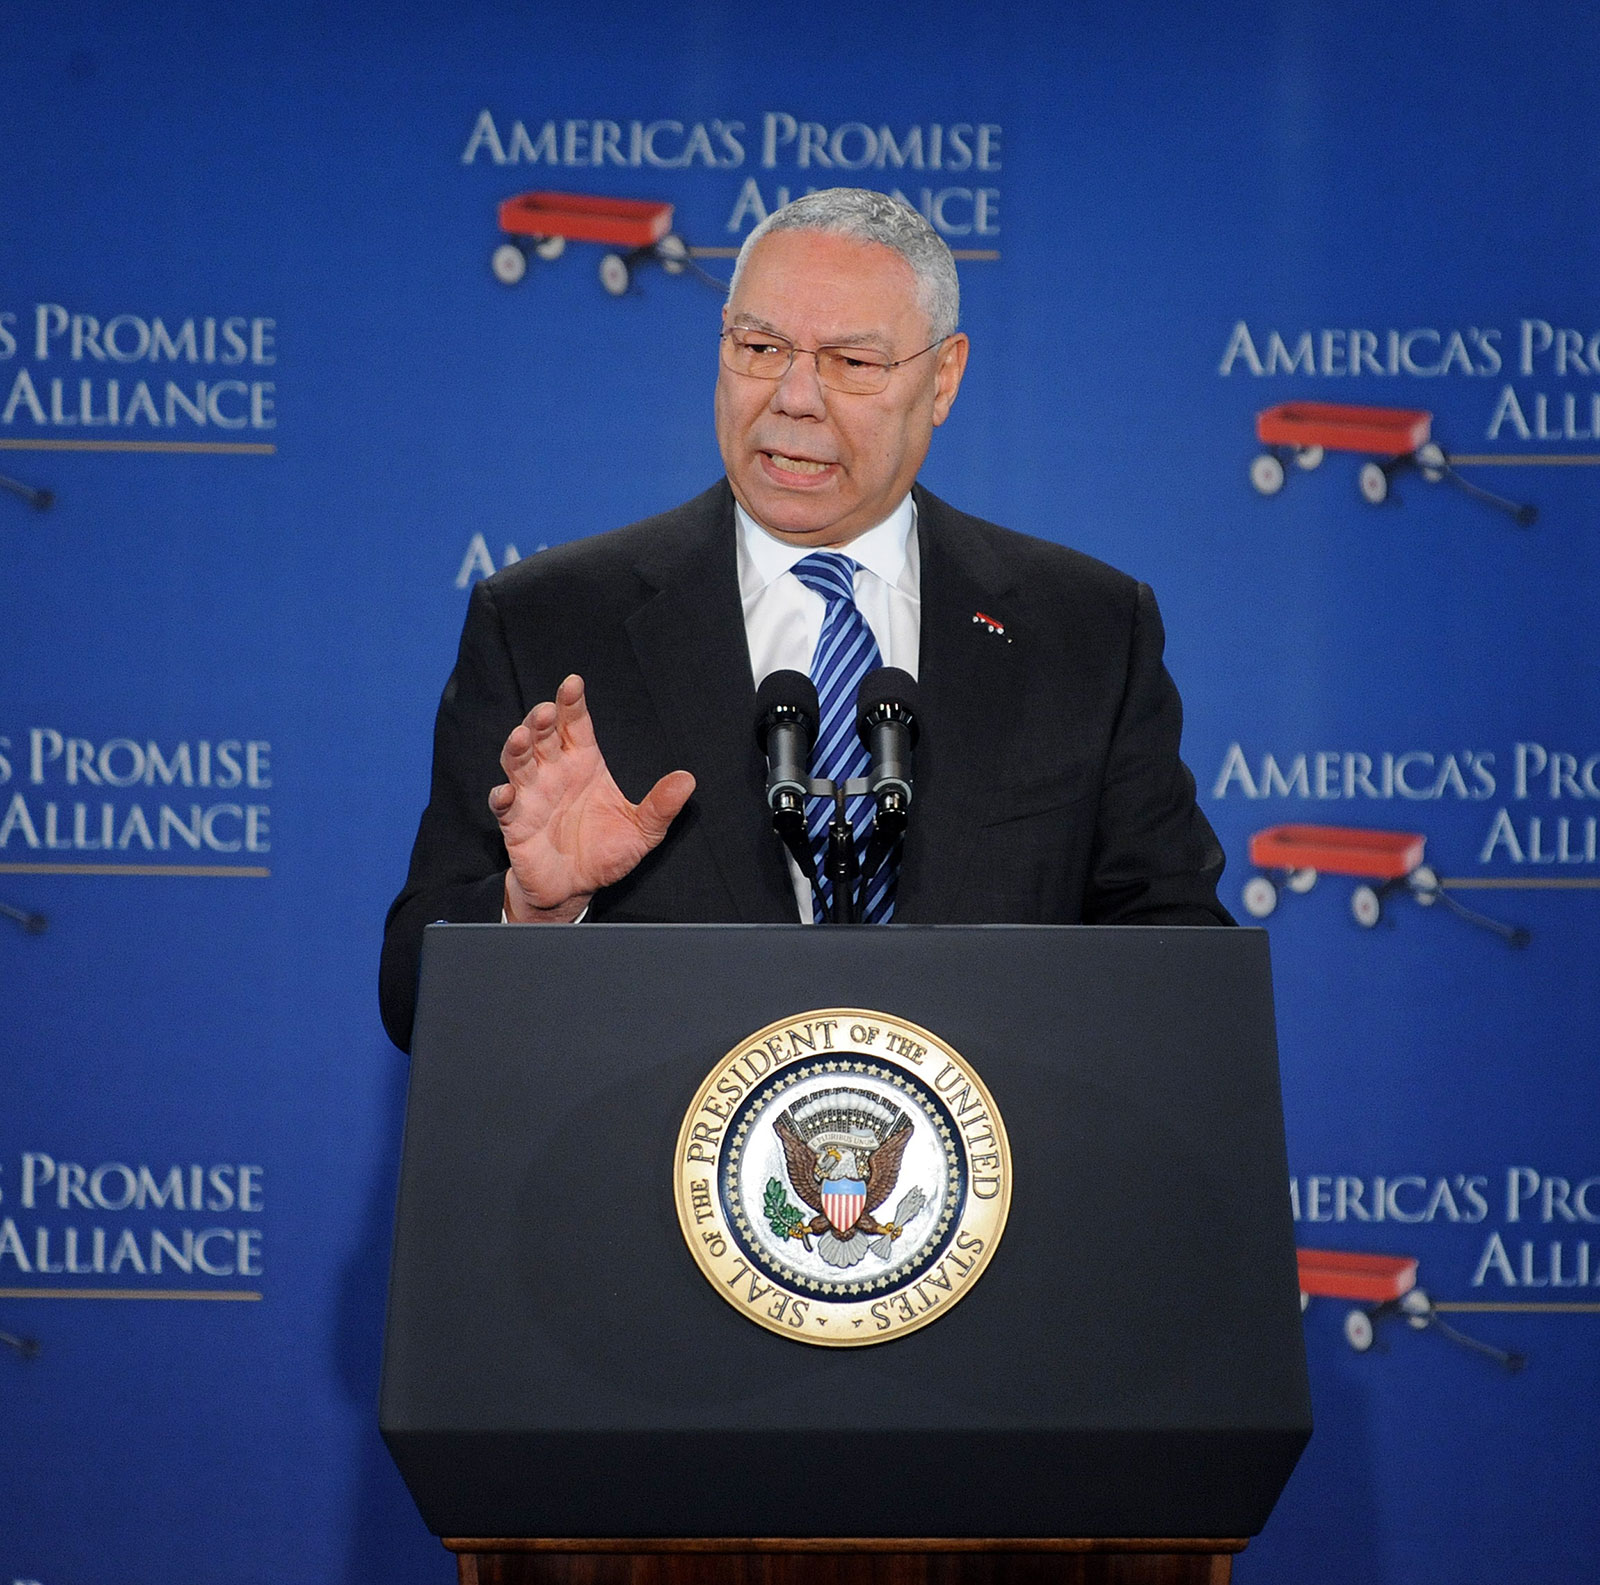 Former Secretary of State Colin Powell delivers remarks at an America's Promise Alliance education event in 2010.